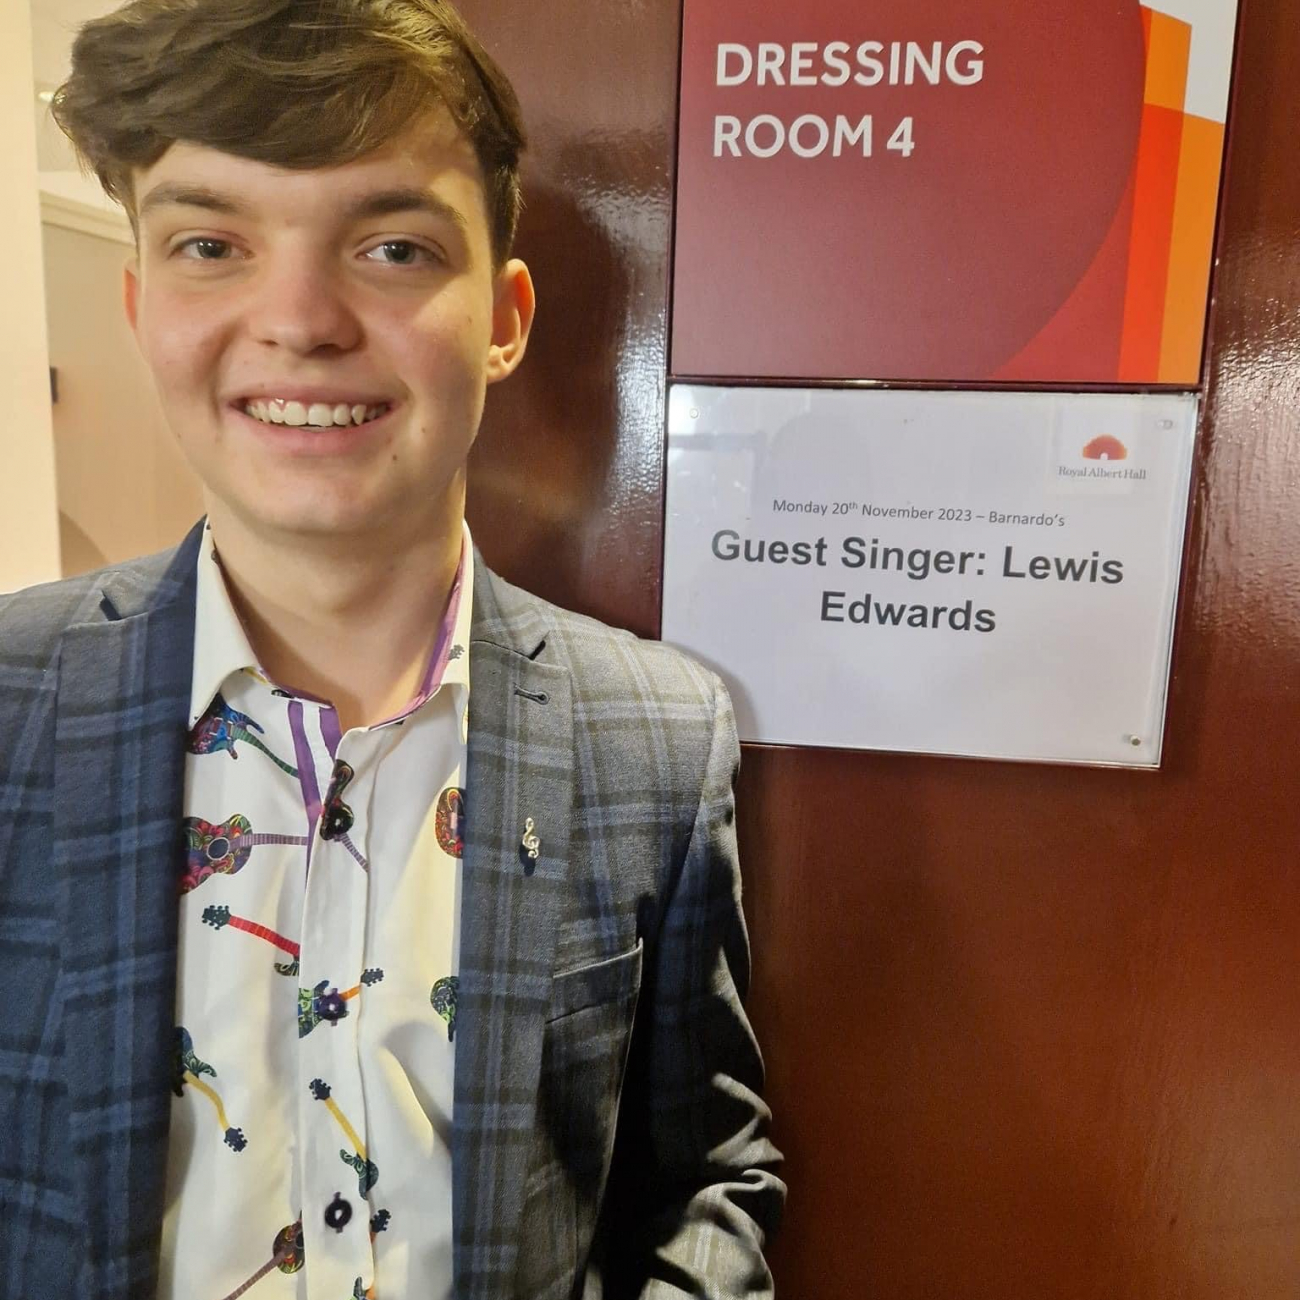 Lewis Edwards in his dressing room